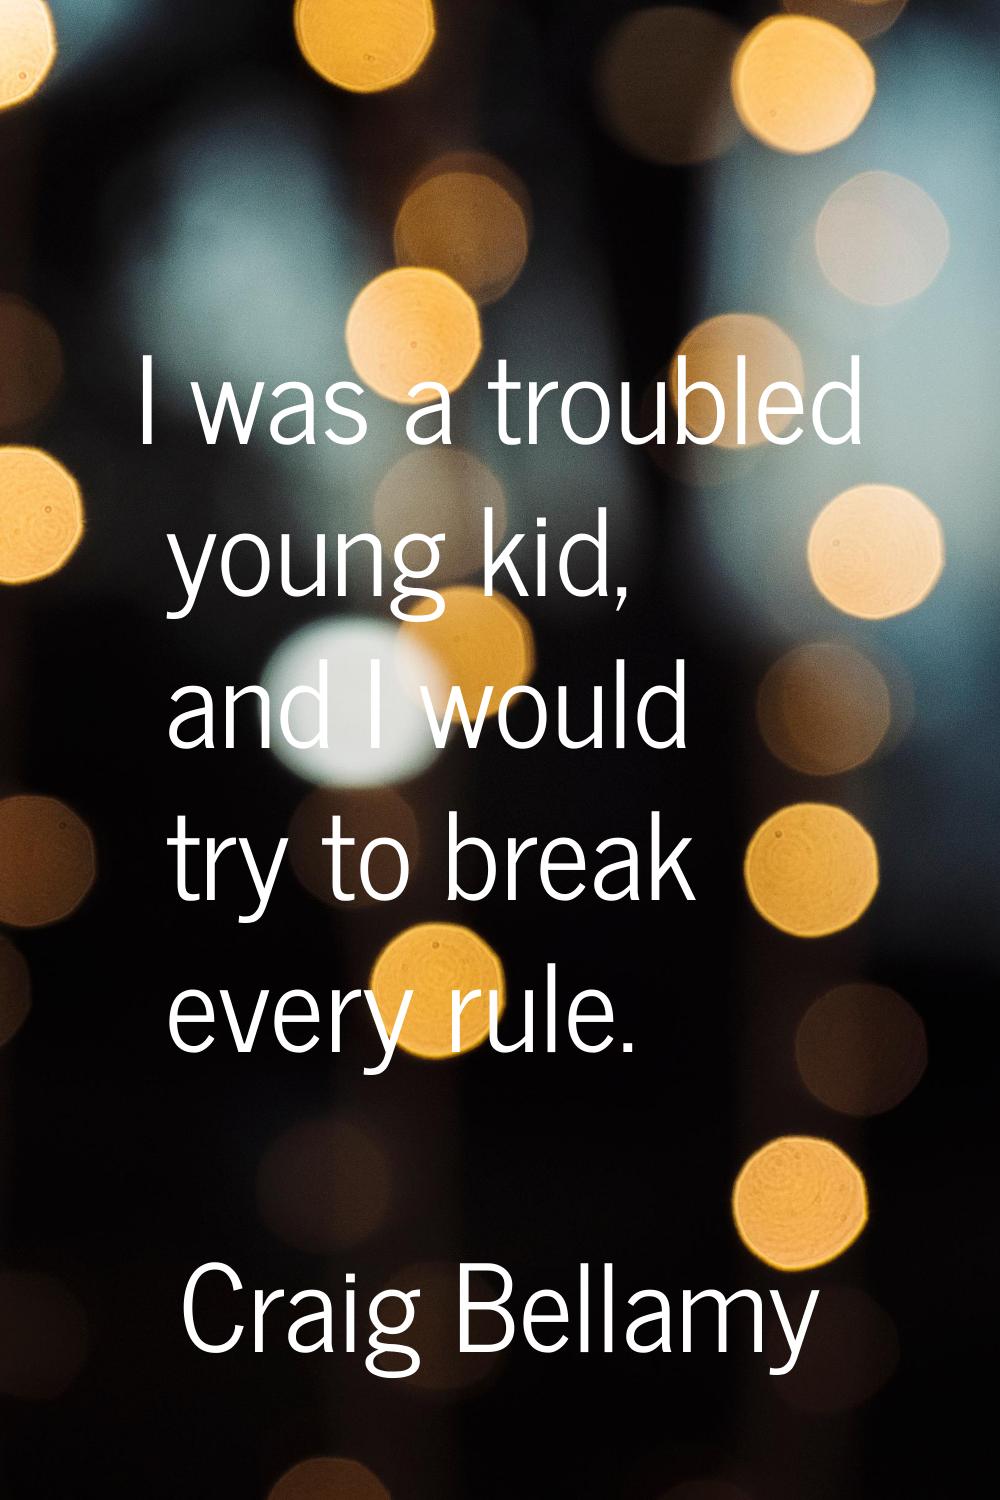 I was a troubled young kid, and I would try to break every rule.